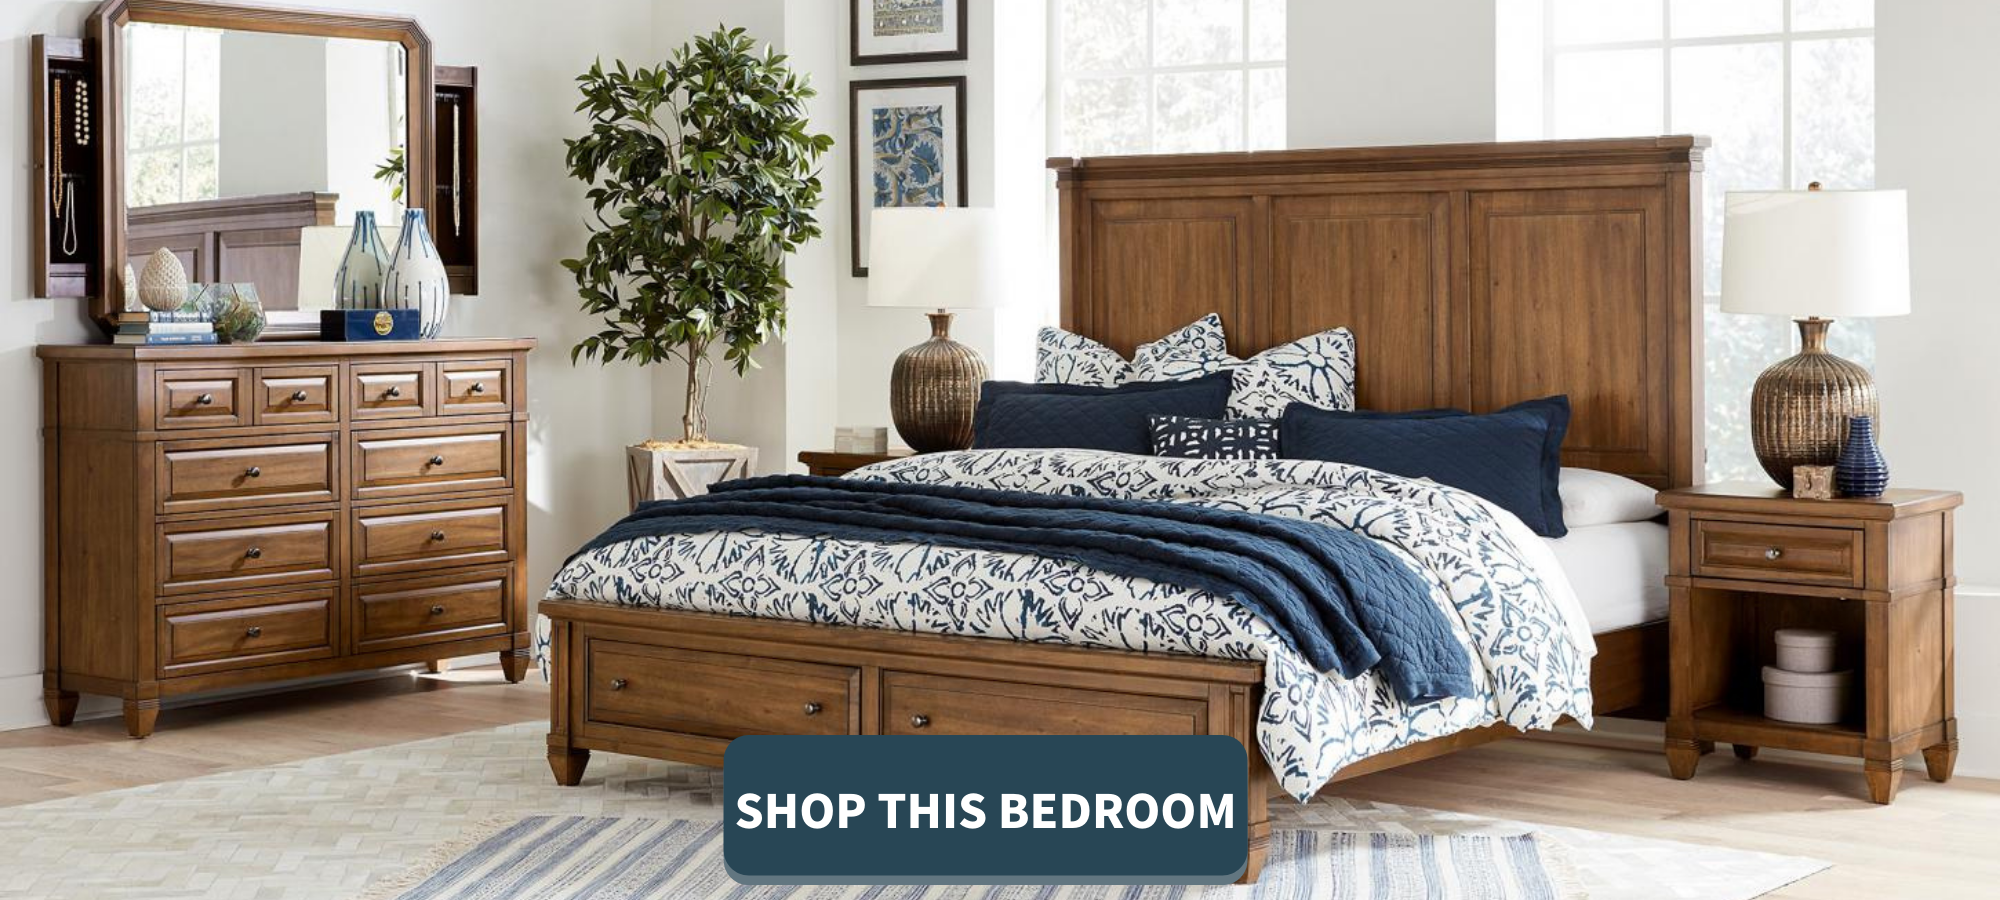 Thornton Bedroom Collection